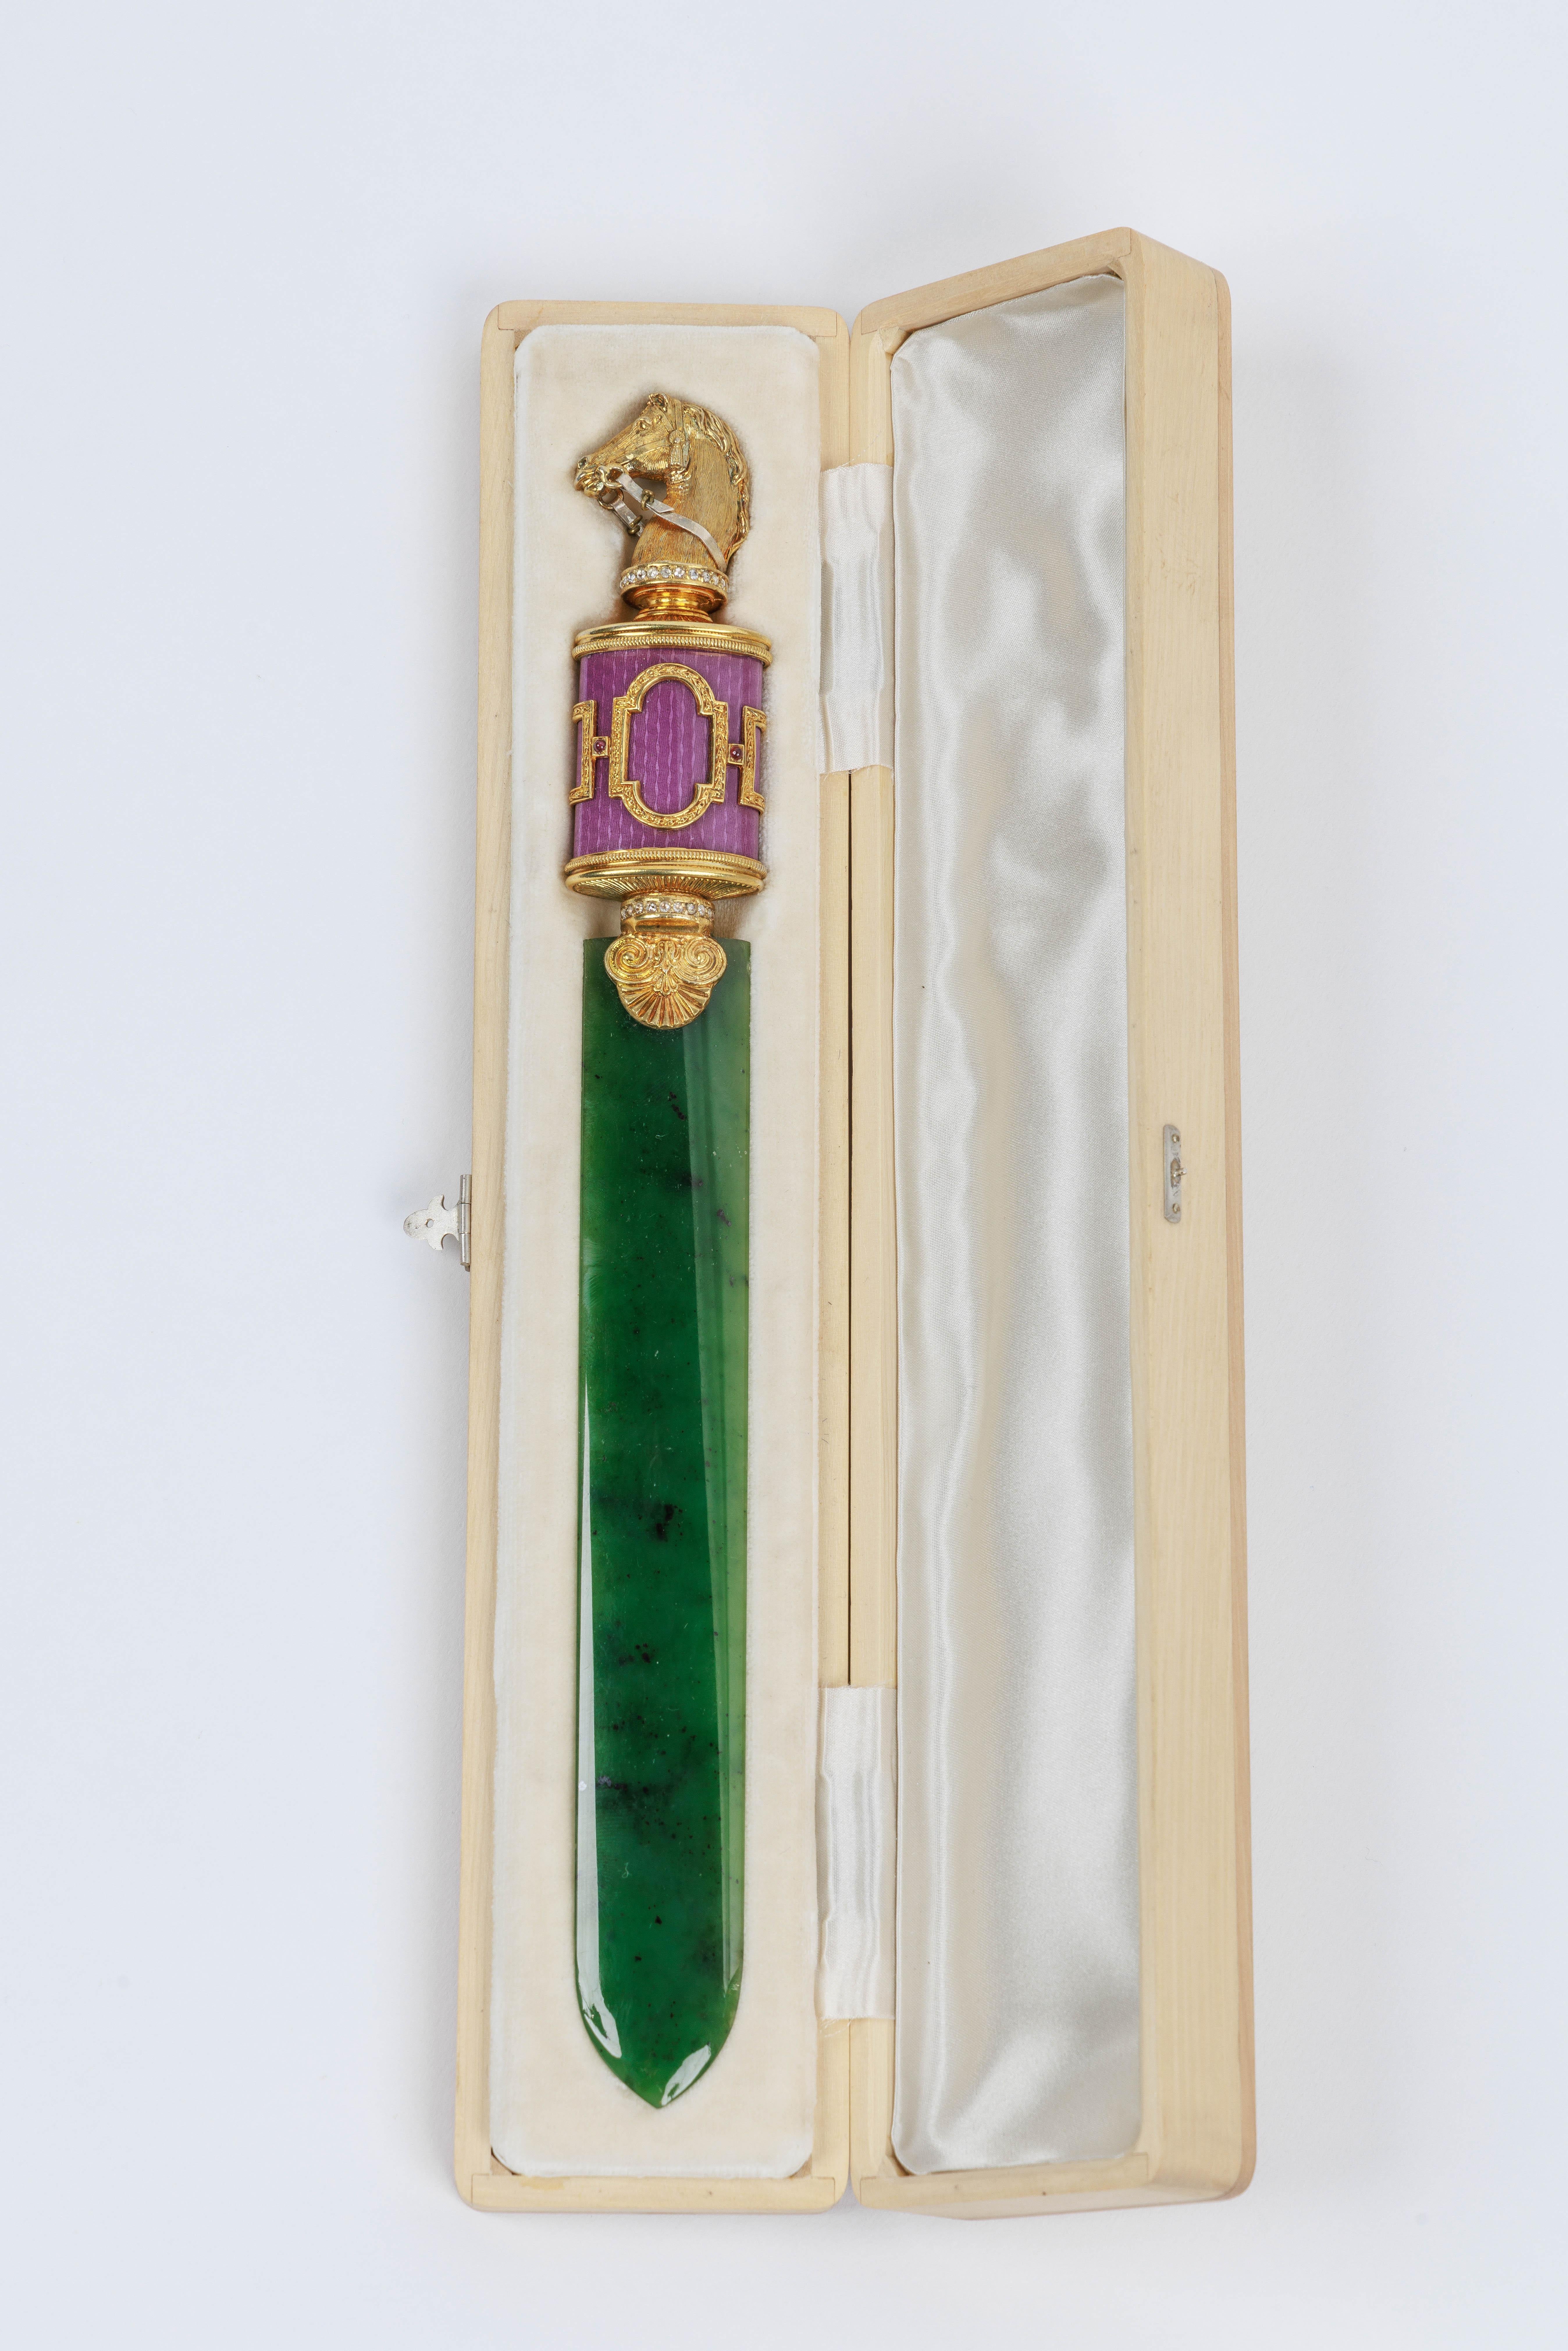 A Russian Silver-Gilt, Diamonds, Nephrite, and Purple Guilloche Enamel Letter Opener, with a horse head, in original fitted box.

Exquisite jewel like quality, in the Faberge style.

Measures 10